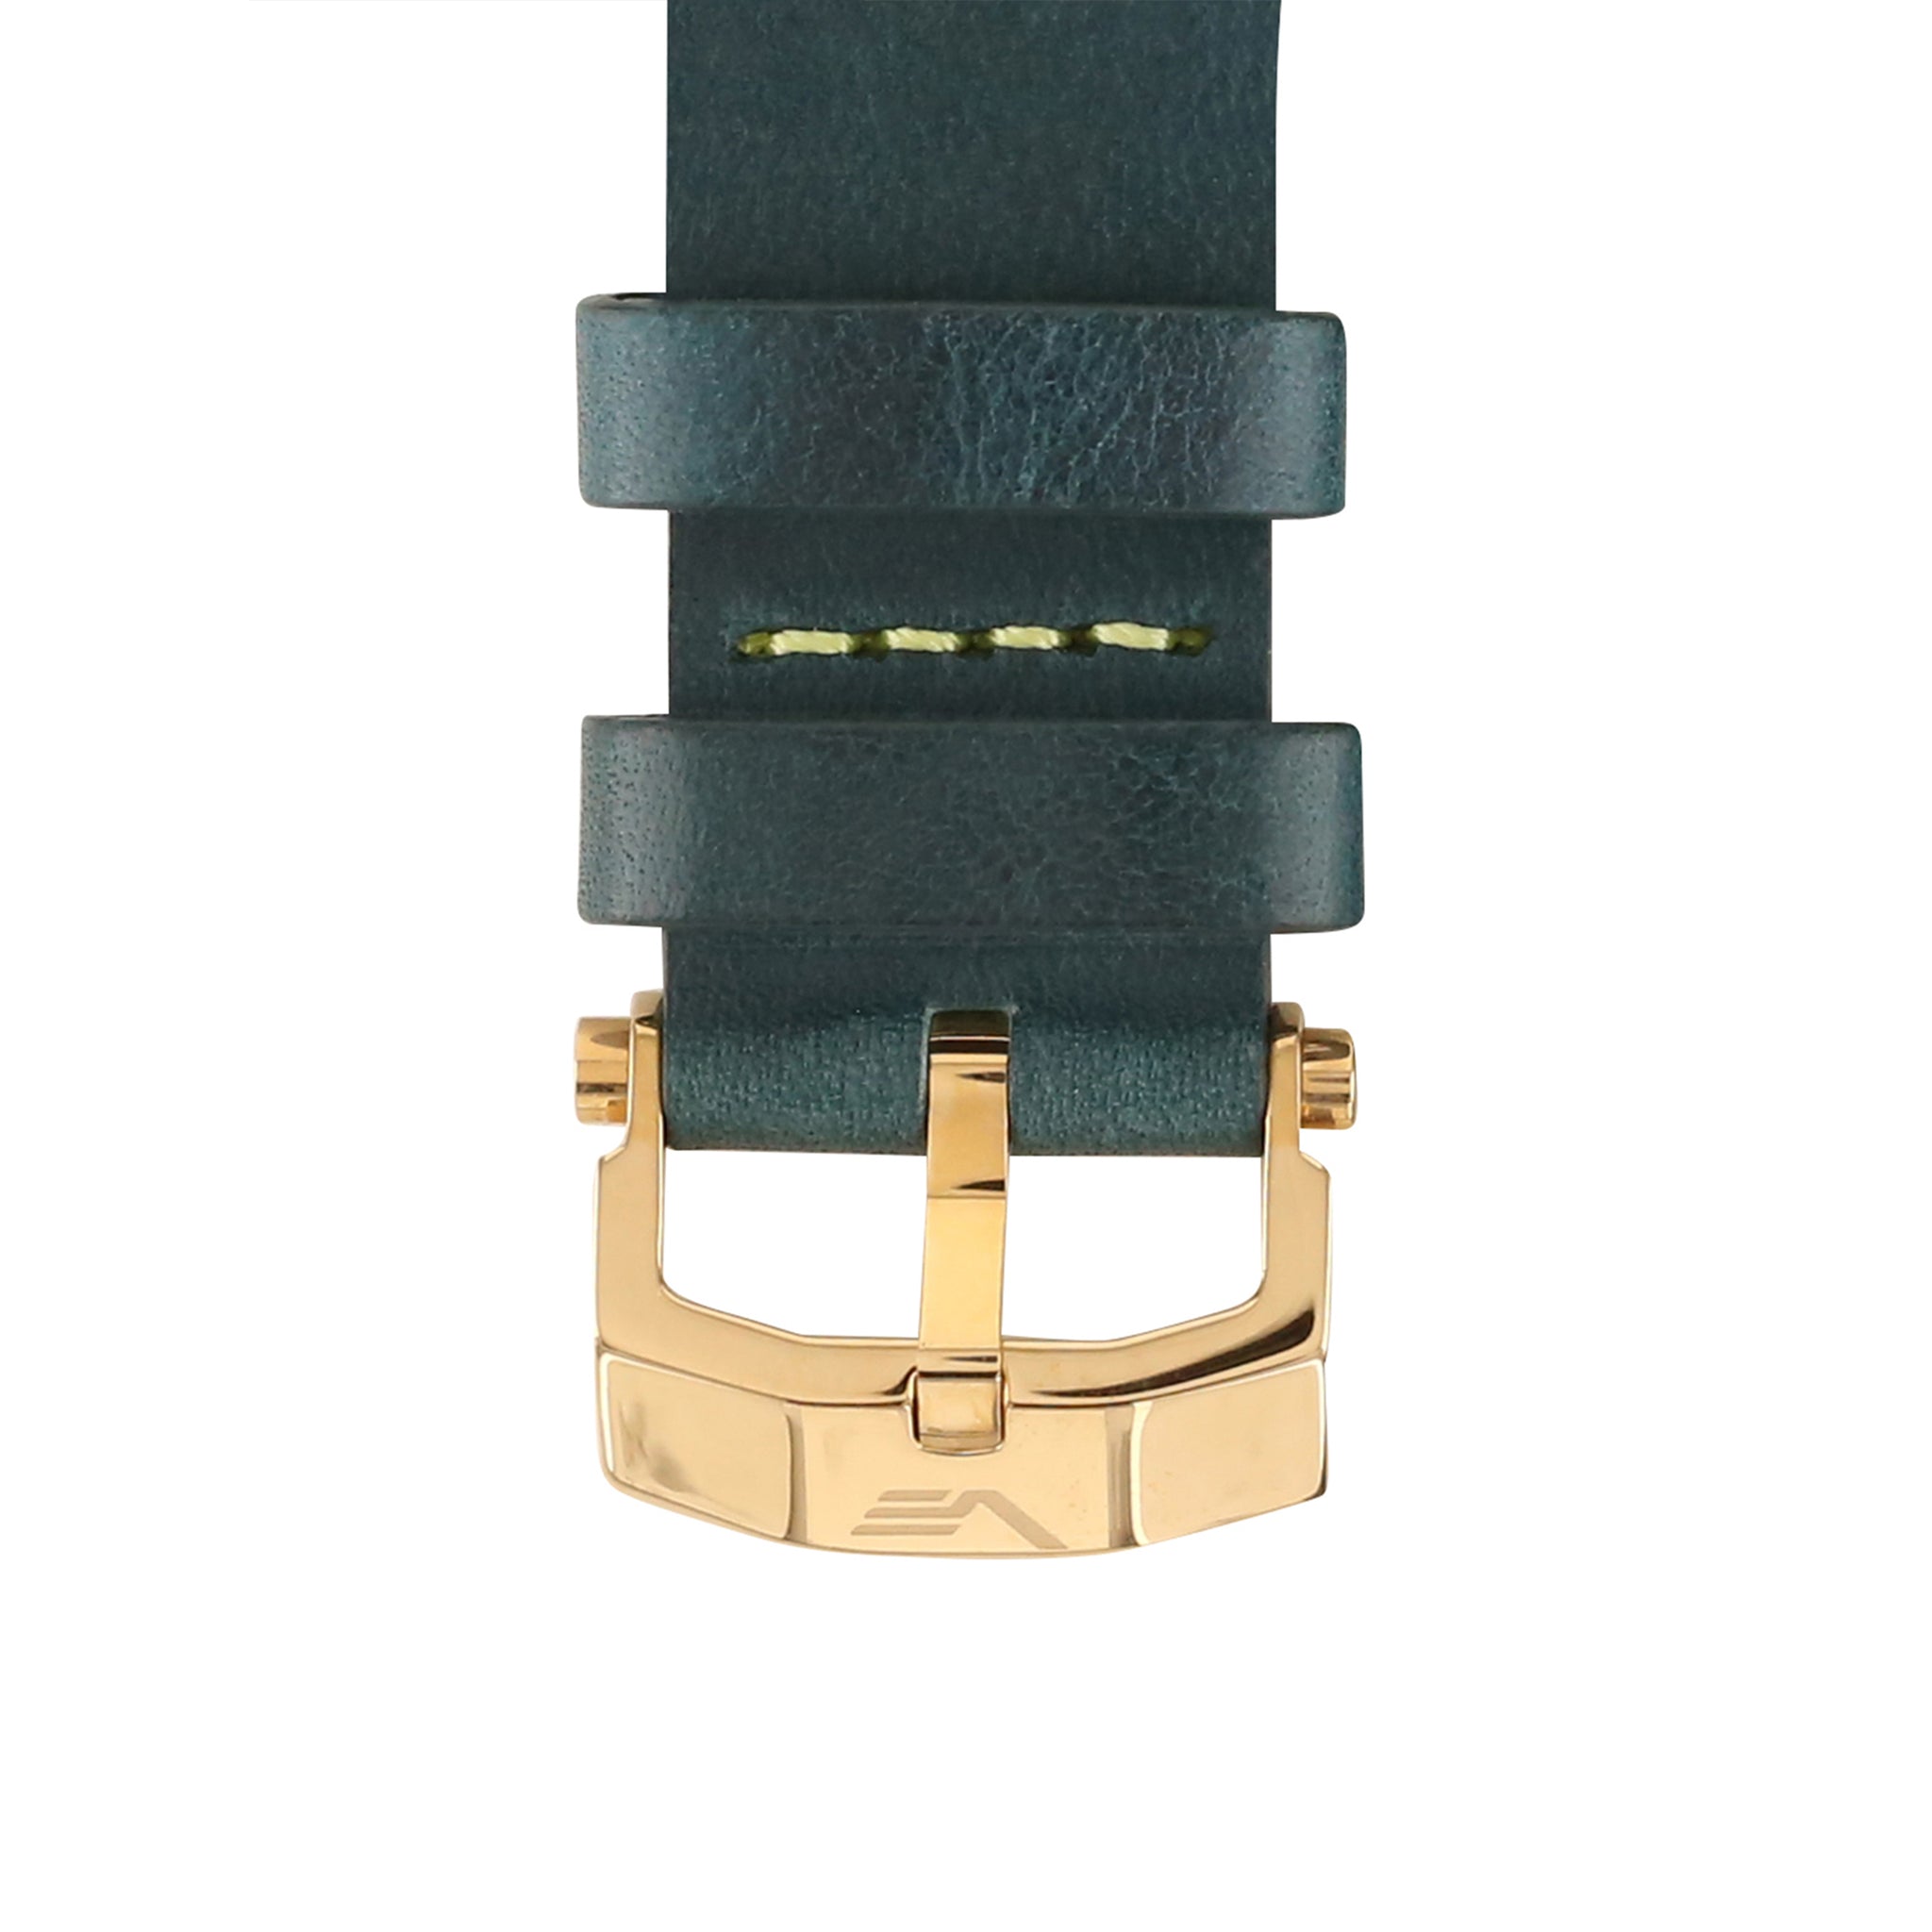 ENERGIA BLUE & YELLOW LEATHER STRAP 26mm - ROSE GOLD BUCKLE